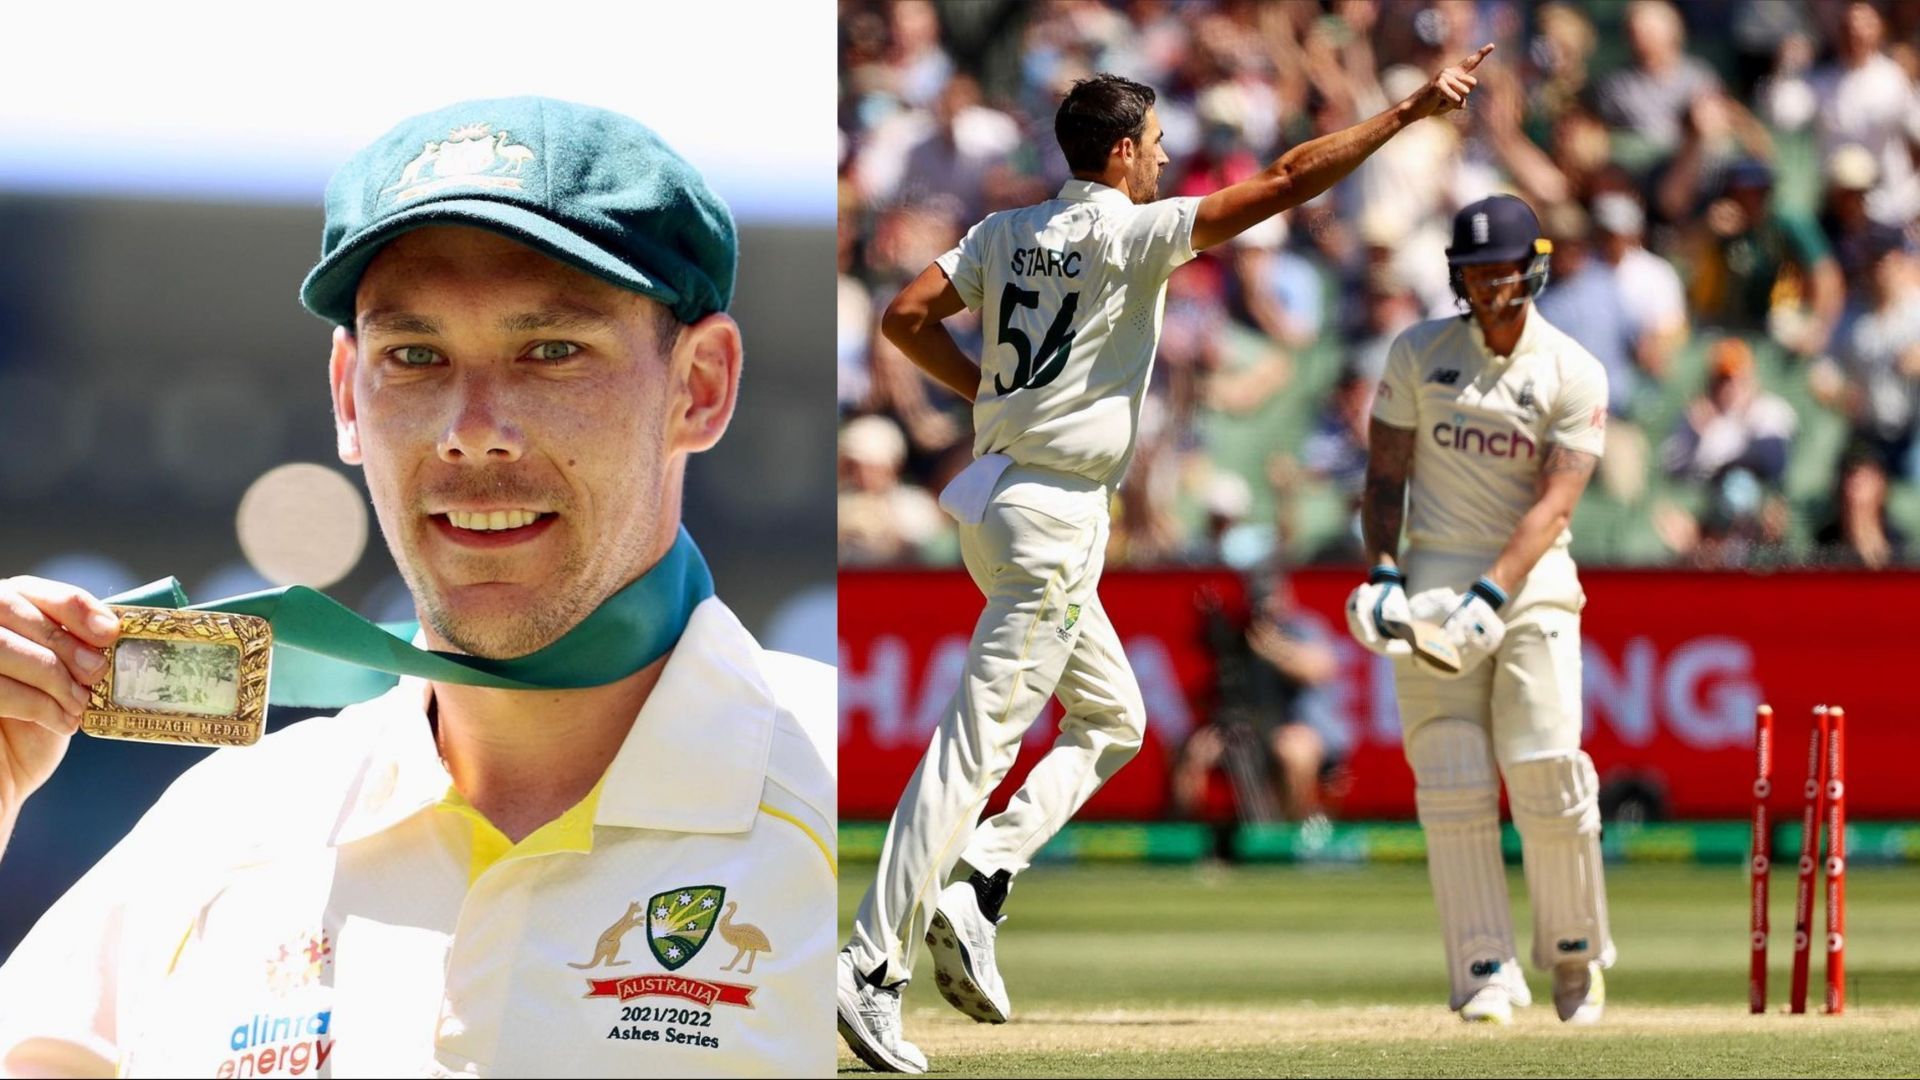 A fine performance from the bowlers helped Australia retain the Ashes at the Melbourne Cricket Ground